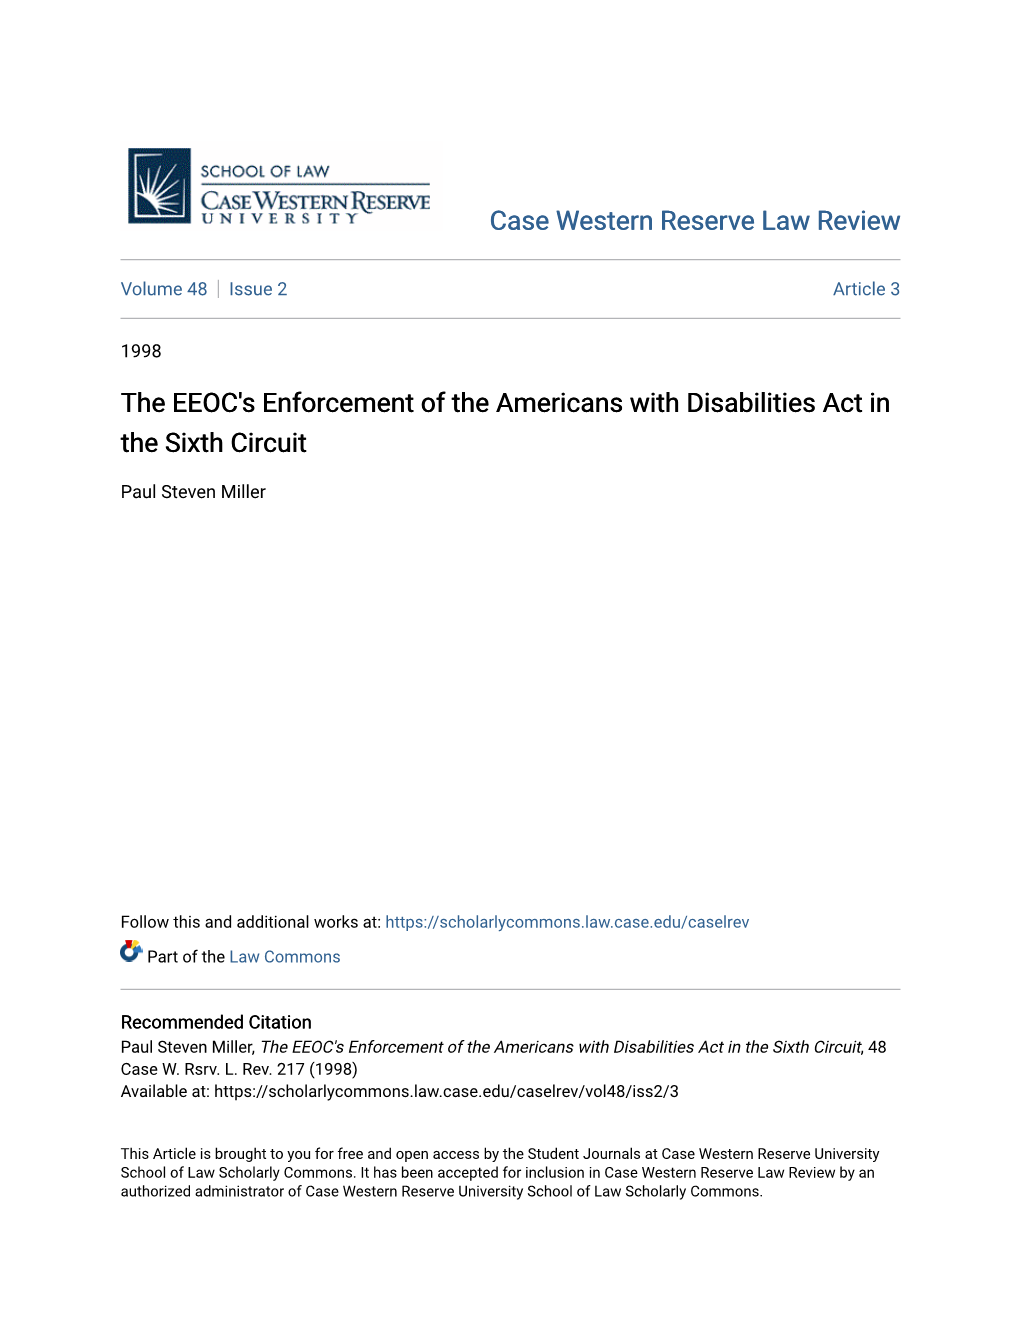 The EEOC's Enforcement of the Americans with Disabilities Act in the Sixth Circuit